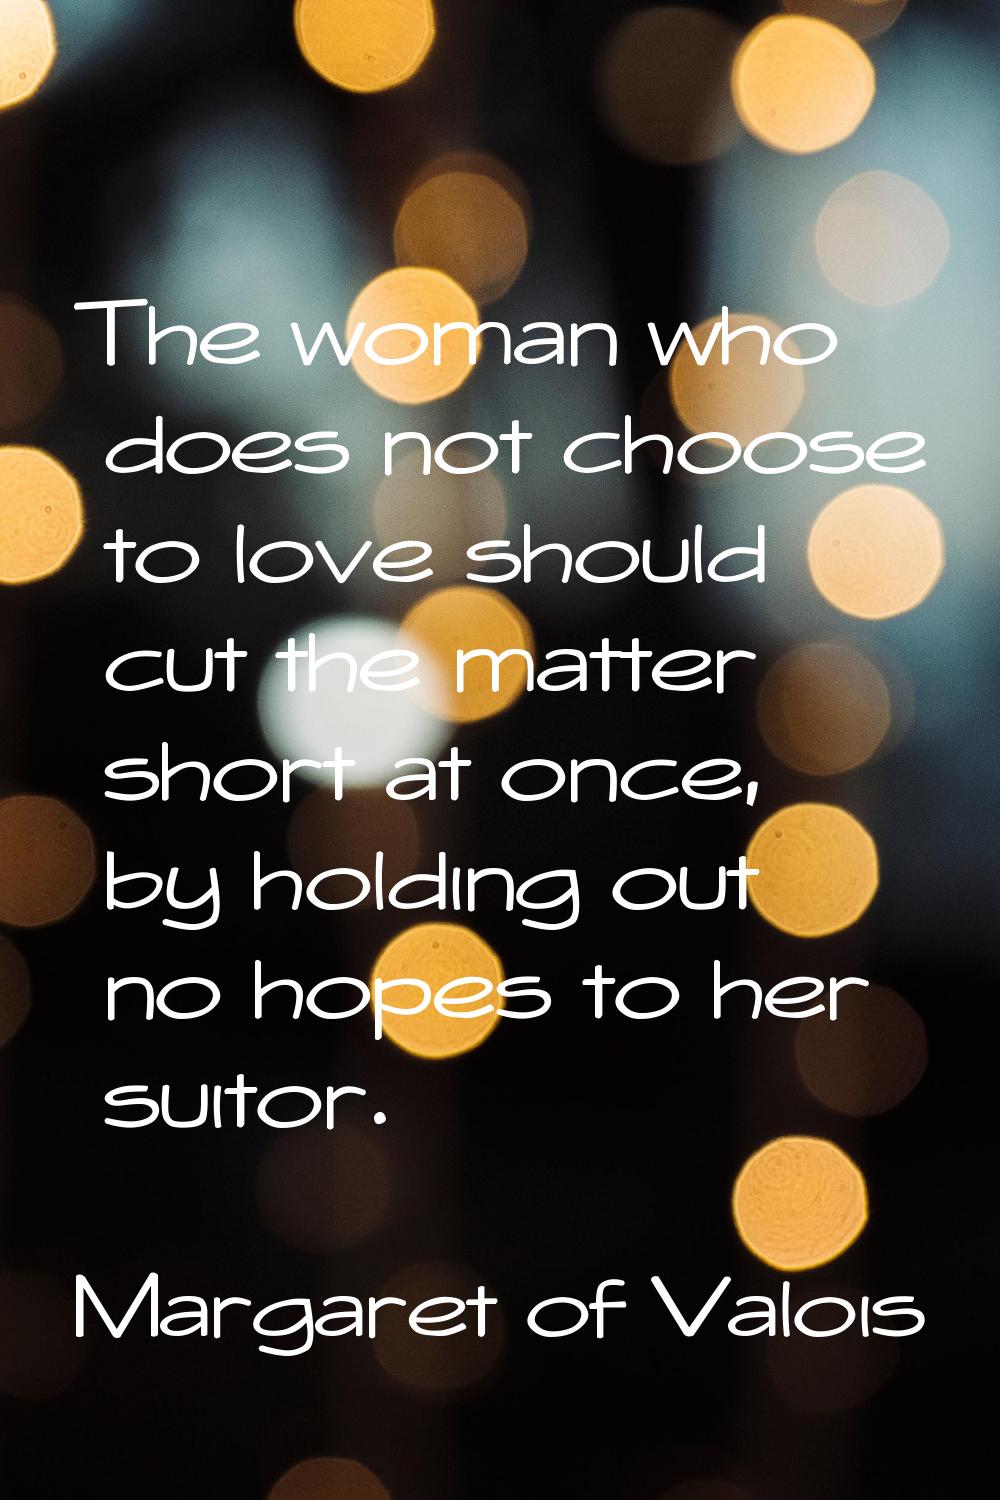 The woman who does not choose to love should cut the matter short at once, by holding out no hopes 